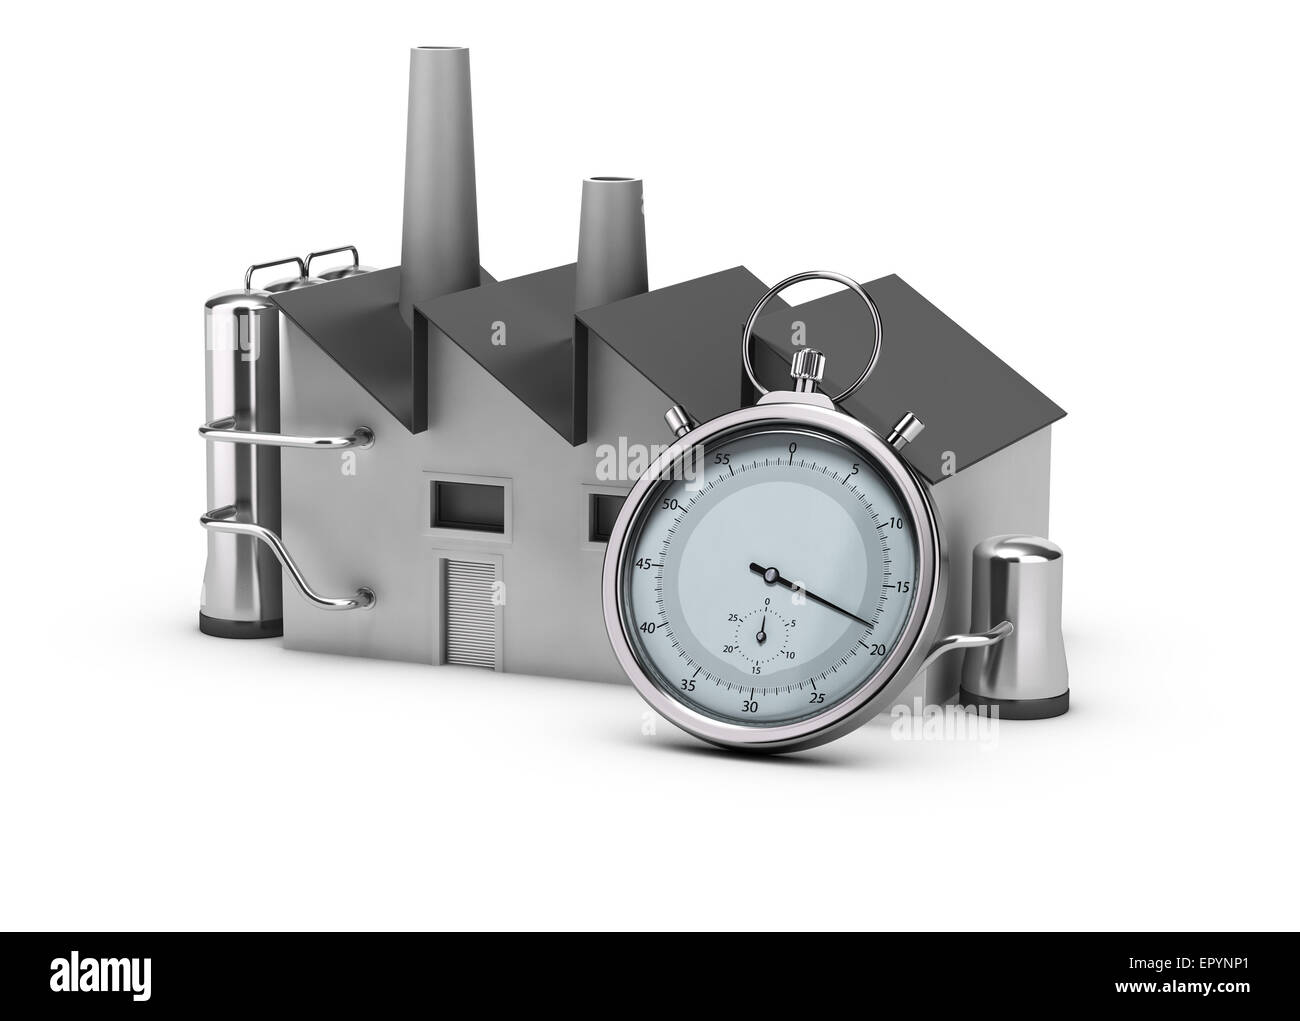 Illustration of productivity. 3D render of a factory and a stopwatch. Image over white background. Stock Photo